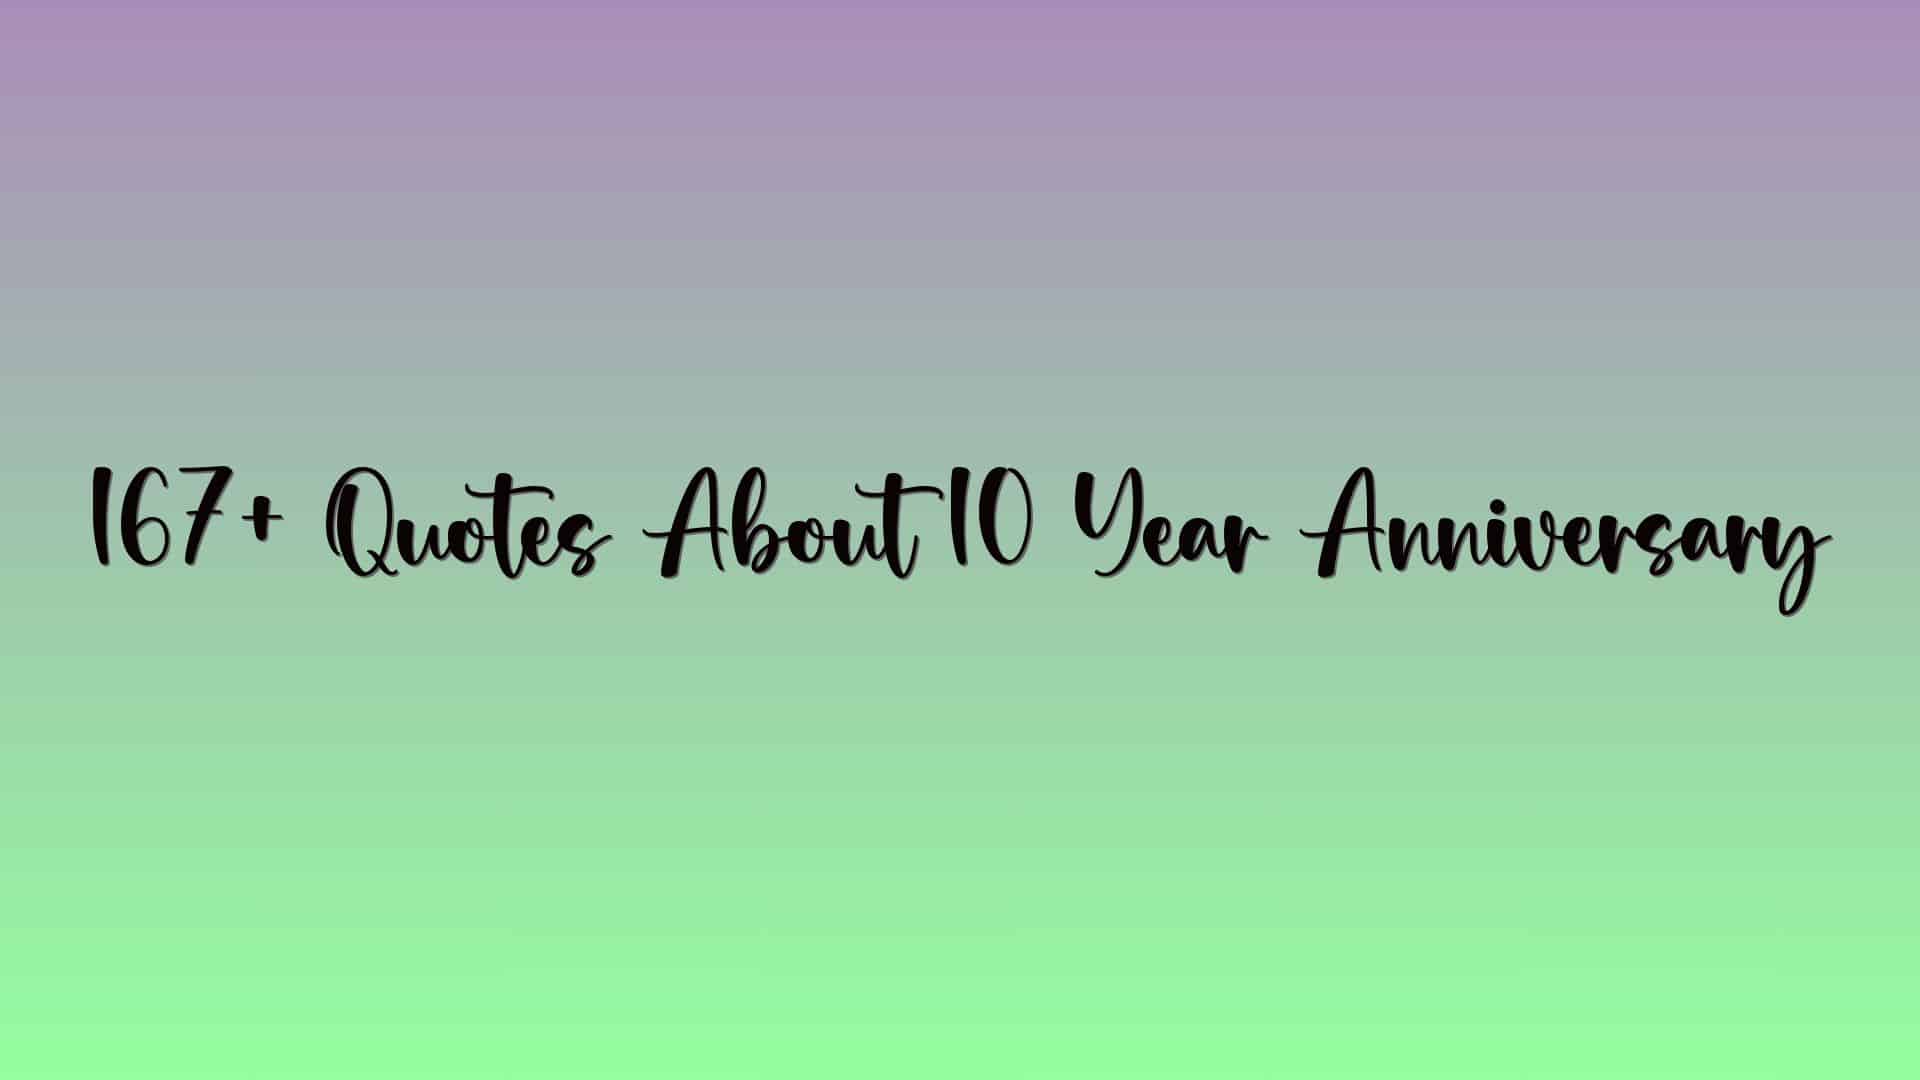 167+ Quotes About 10 Year Anniversary